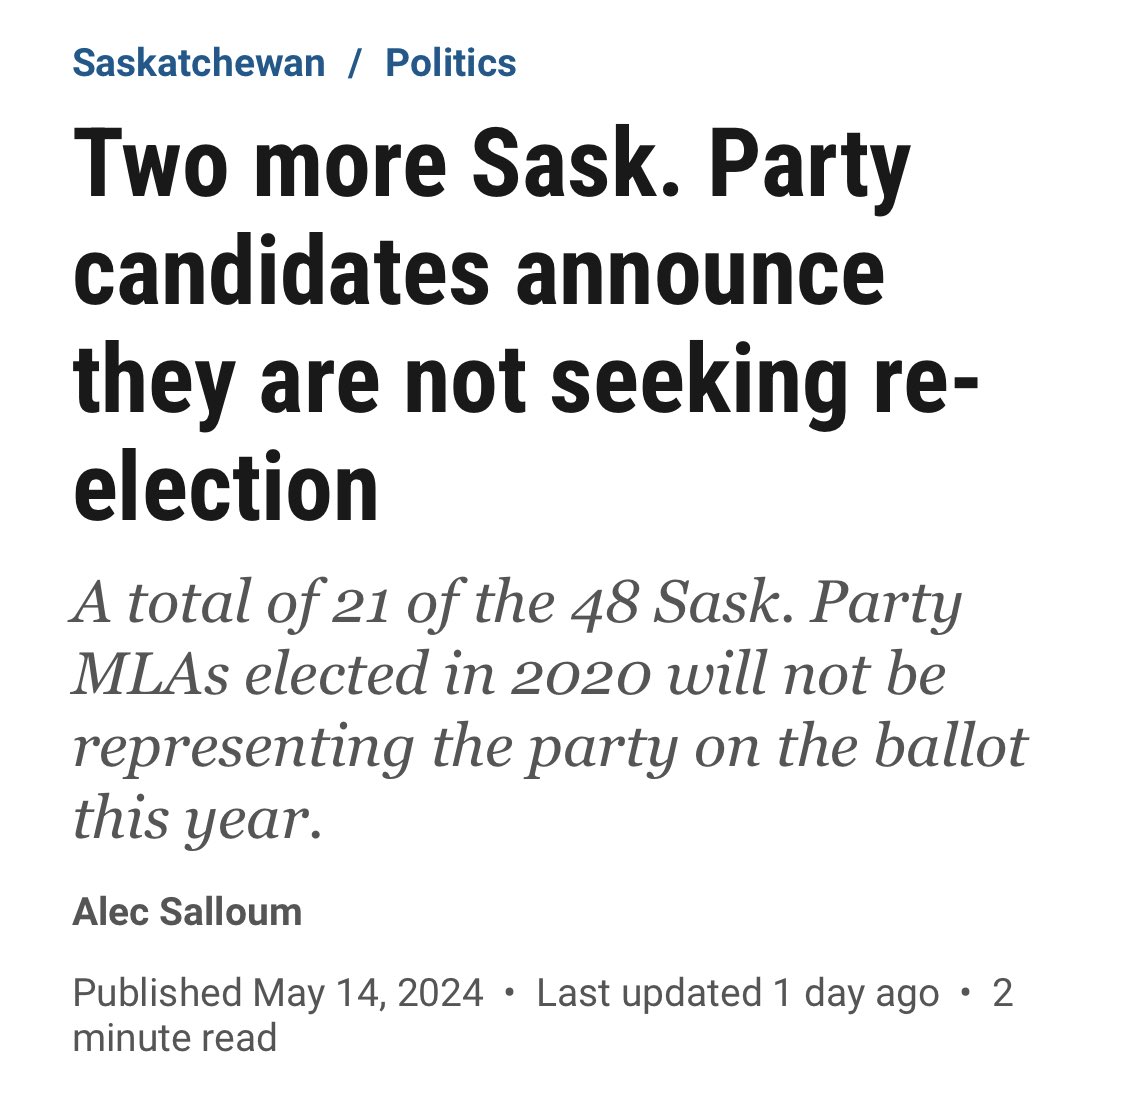 This, and the fact that nearly half of the Sask Party MLAs are not seeking re-election is extremely telling.